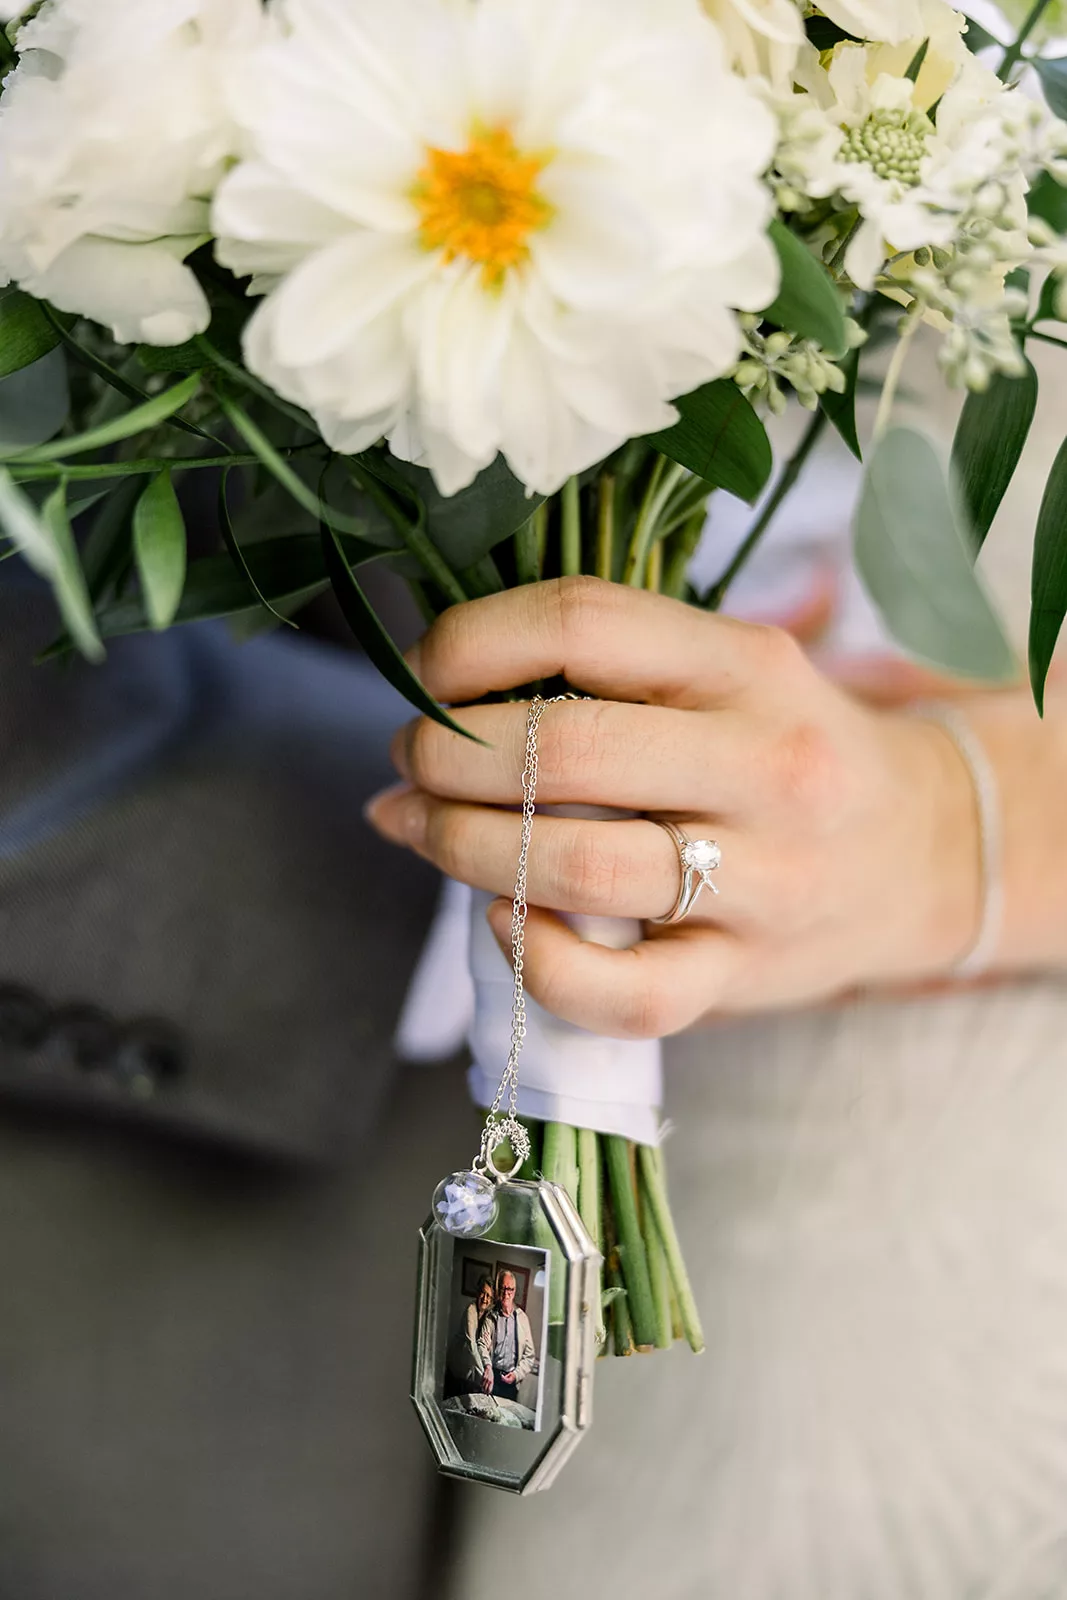 Details of a brides bouquet decorations and hand